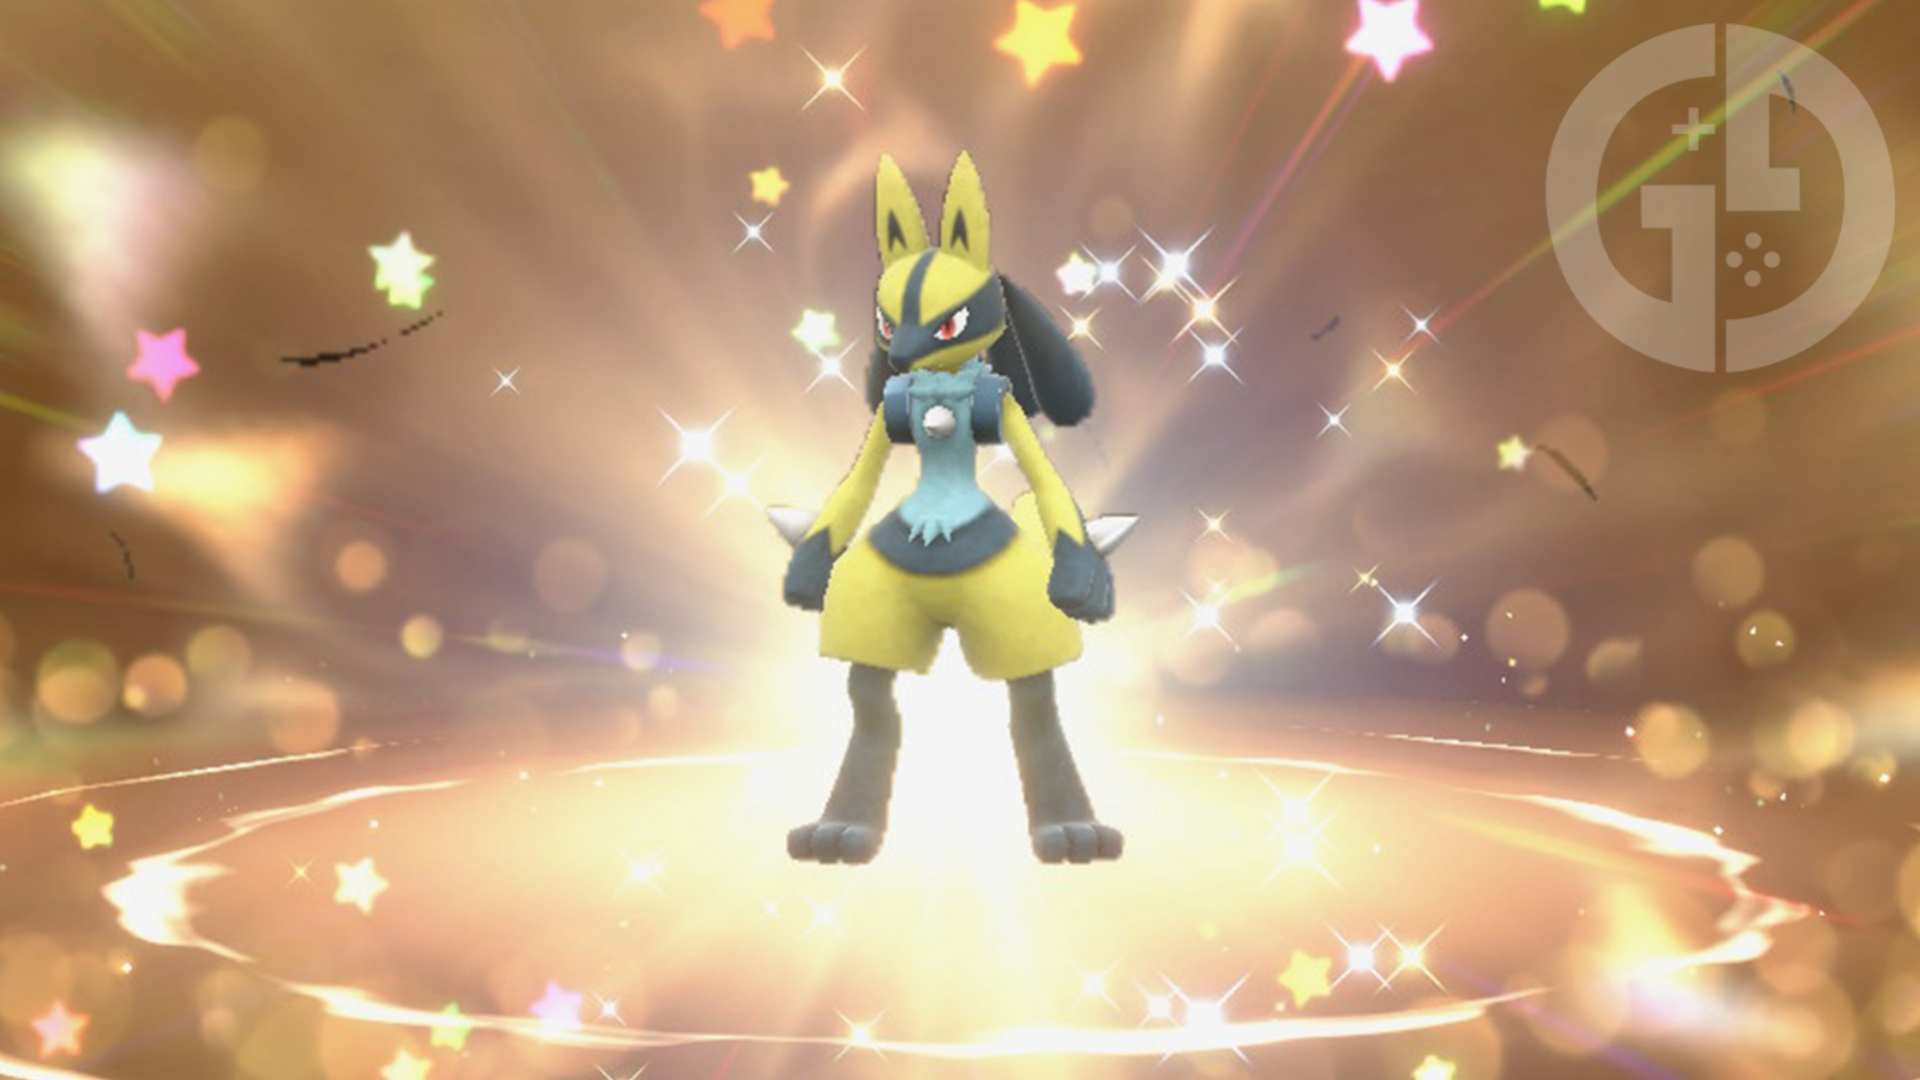 How to get free Shiny Lucario code in Pokemon Scarlet & Violet